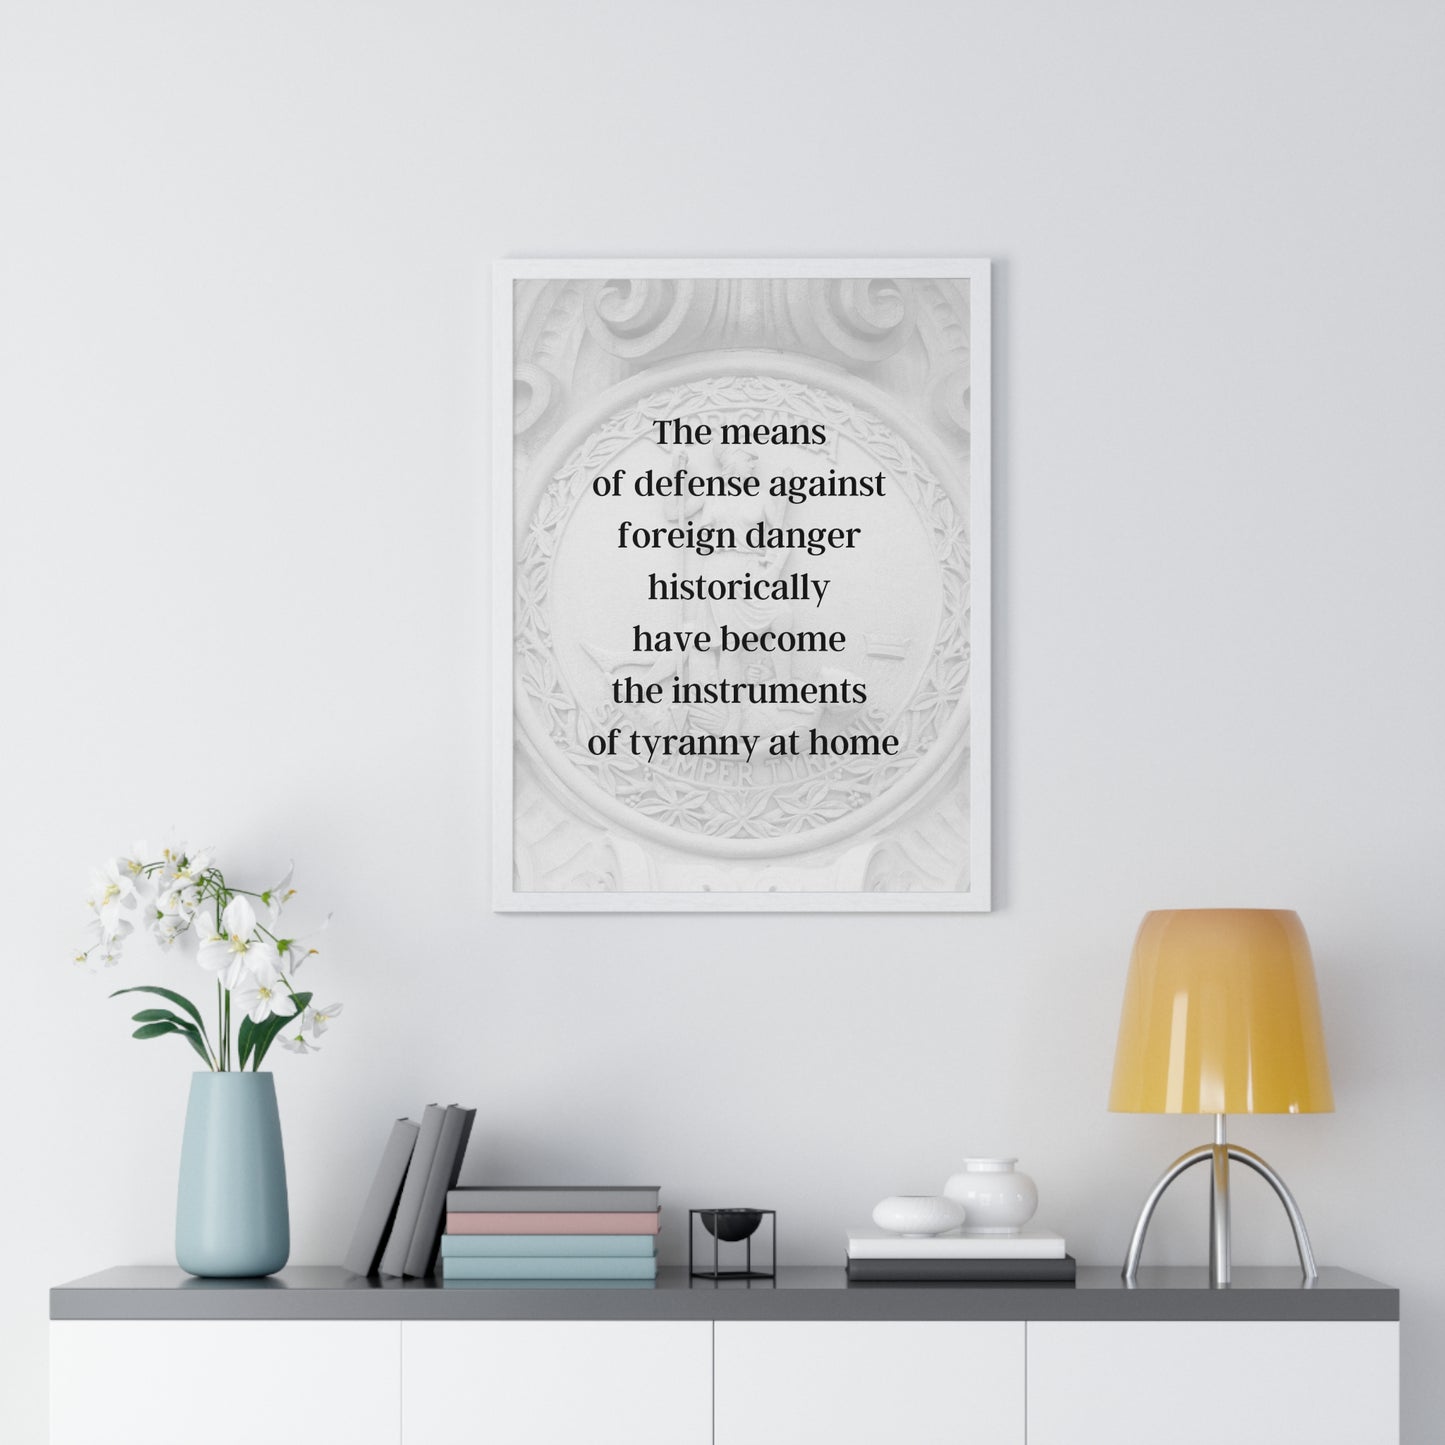 James Madison Quote 2, Poster Art, Sic Semper Tyrannis Print, 4th President of the United States, Democracy, Freedom, American Patriots, AI Art, Political Art, Presidential Quotes, Inspirational Quotes